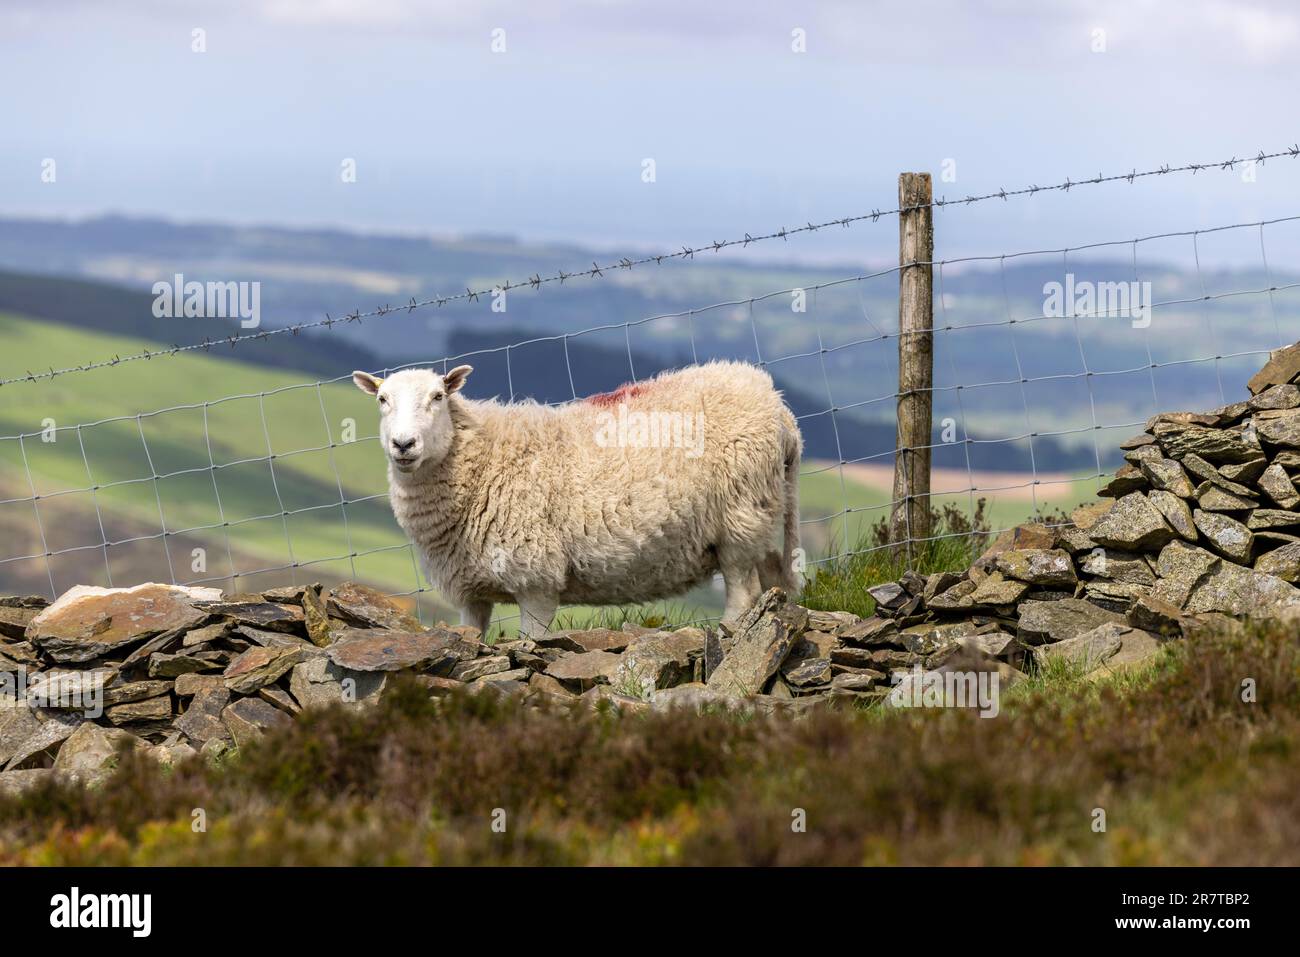 Sheep in front of dry stone wall and barbed wire, Moel Famau, Wales, Great Britain Stock Photo